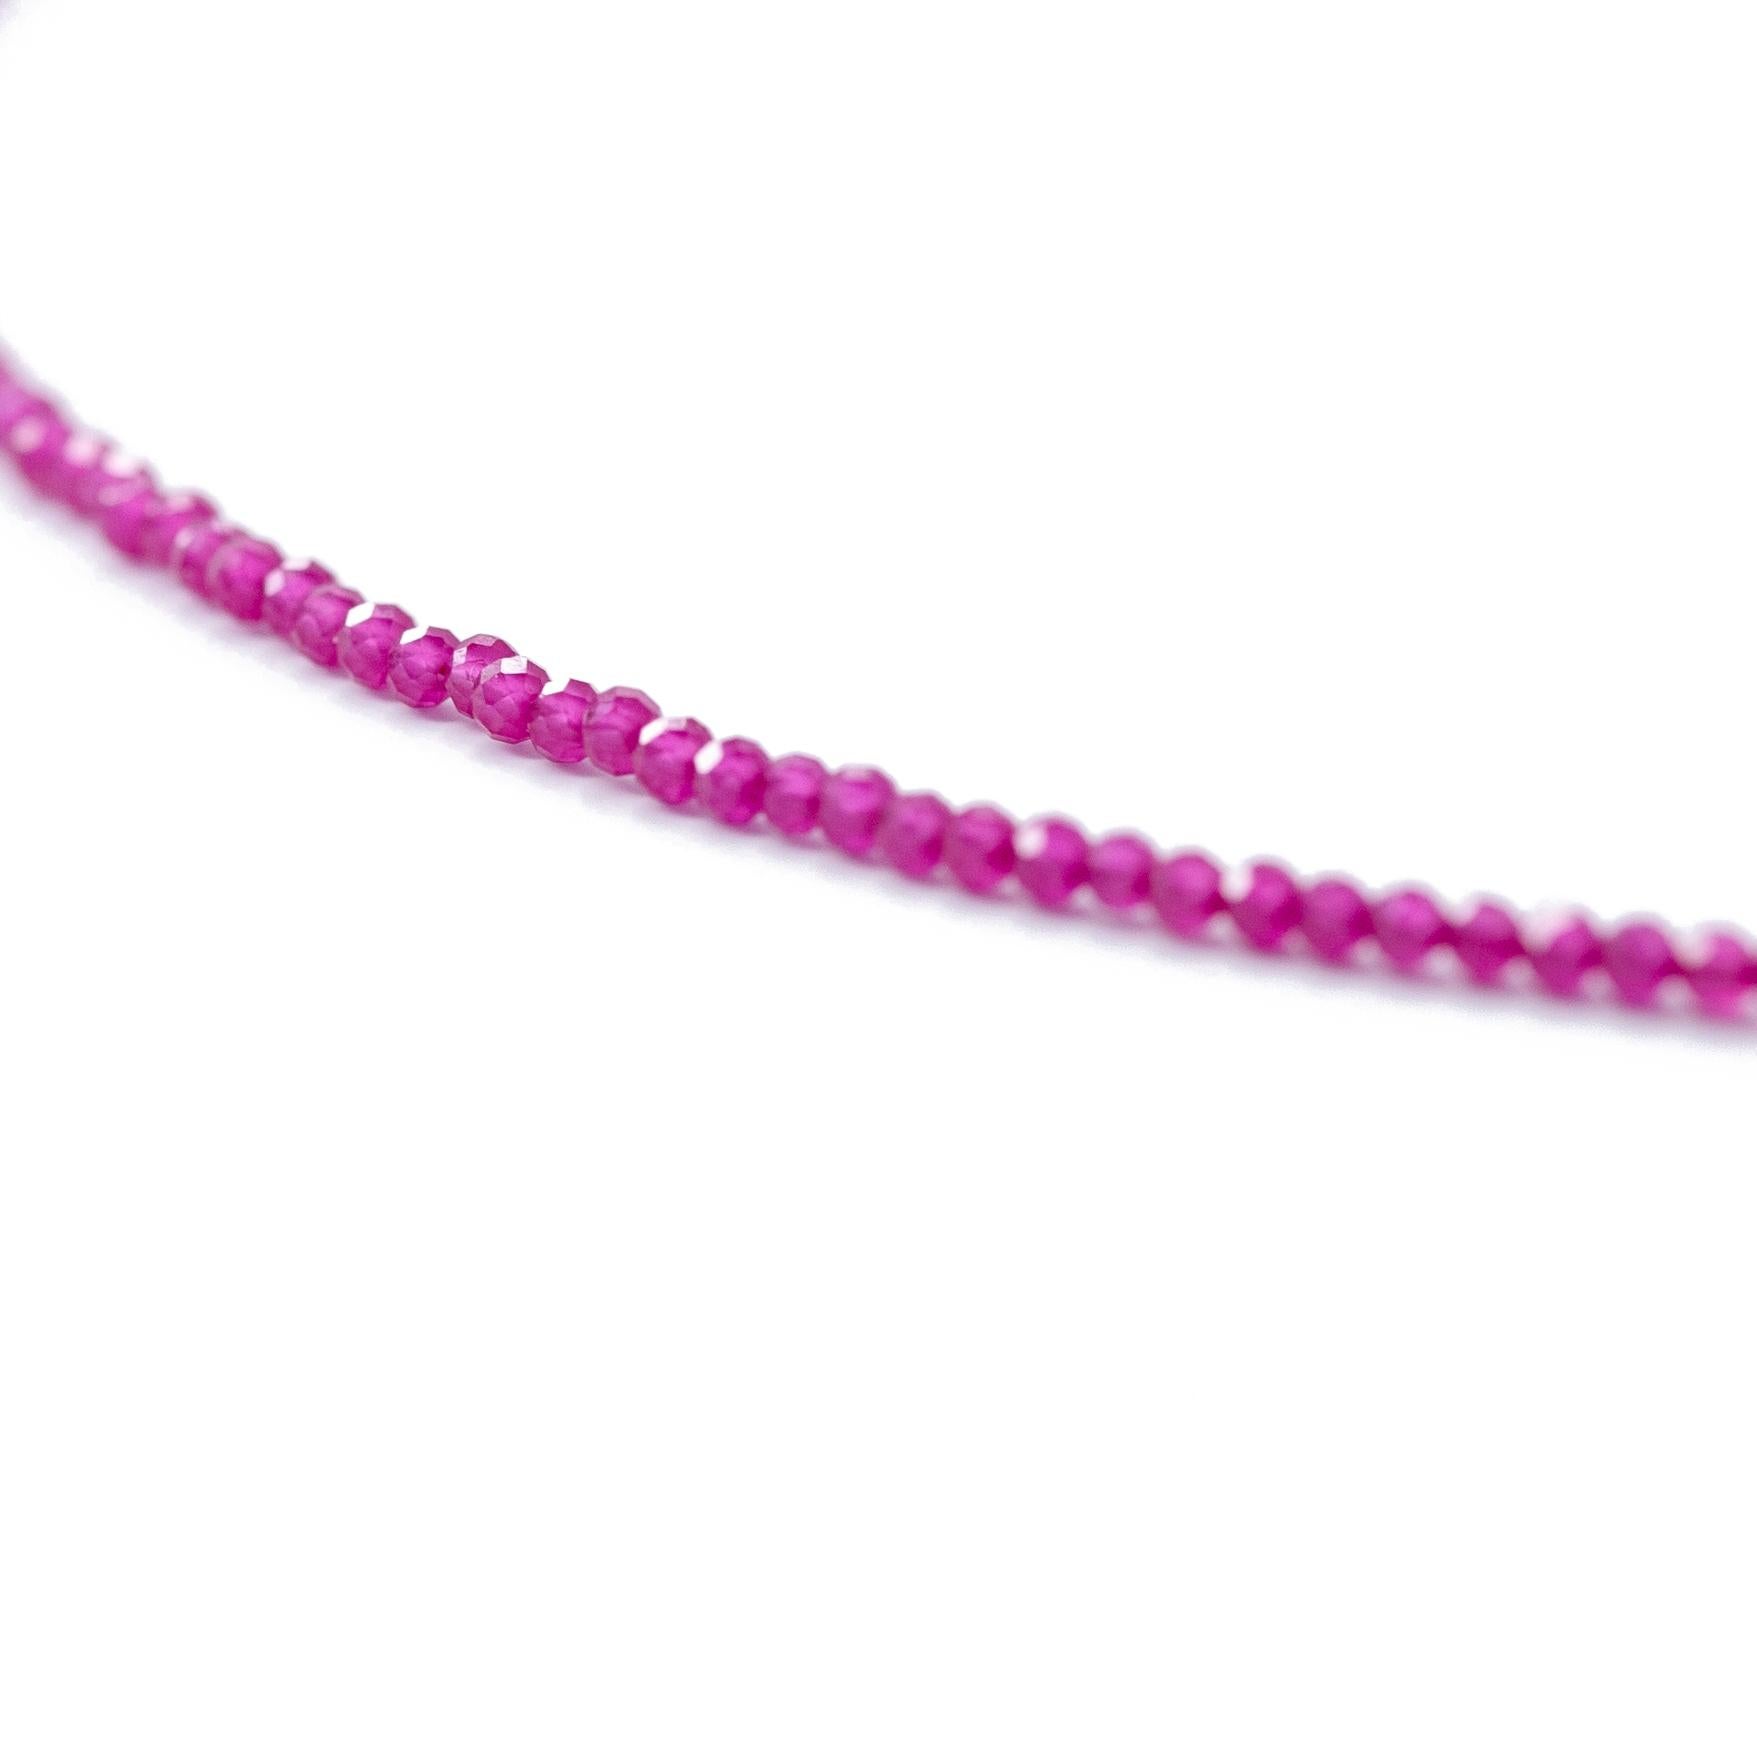 This necklace featuring mini beaded Ruby Gemstones. Fastens with a 120K Gold Plated Sterling Silver hook closure. A perfect pop of color to pair with your favorite day and casual outfit. We love this necklace layered with gold chains and adding a